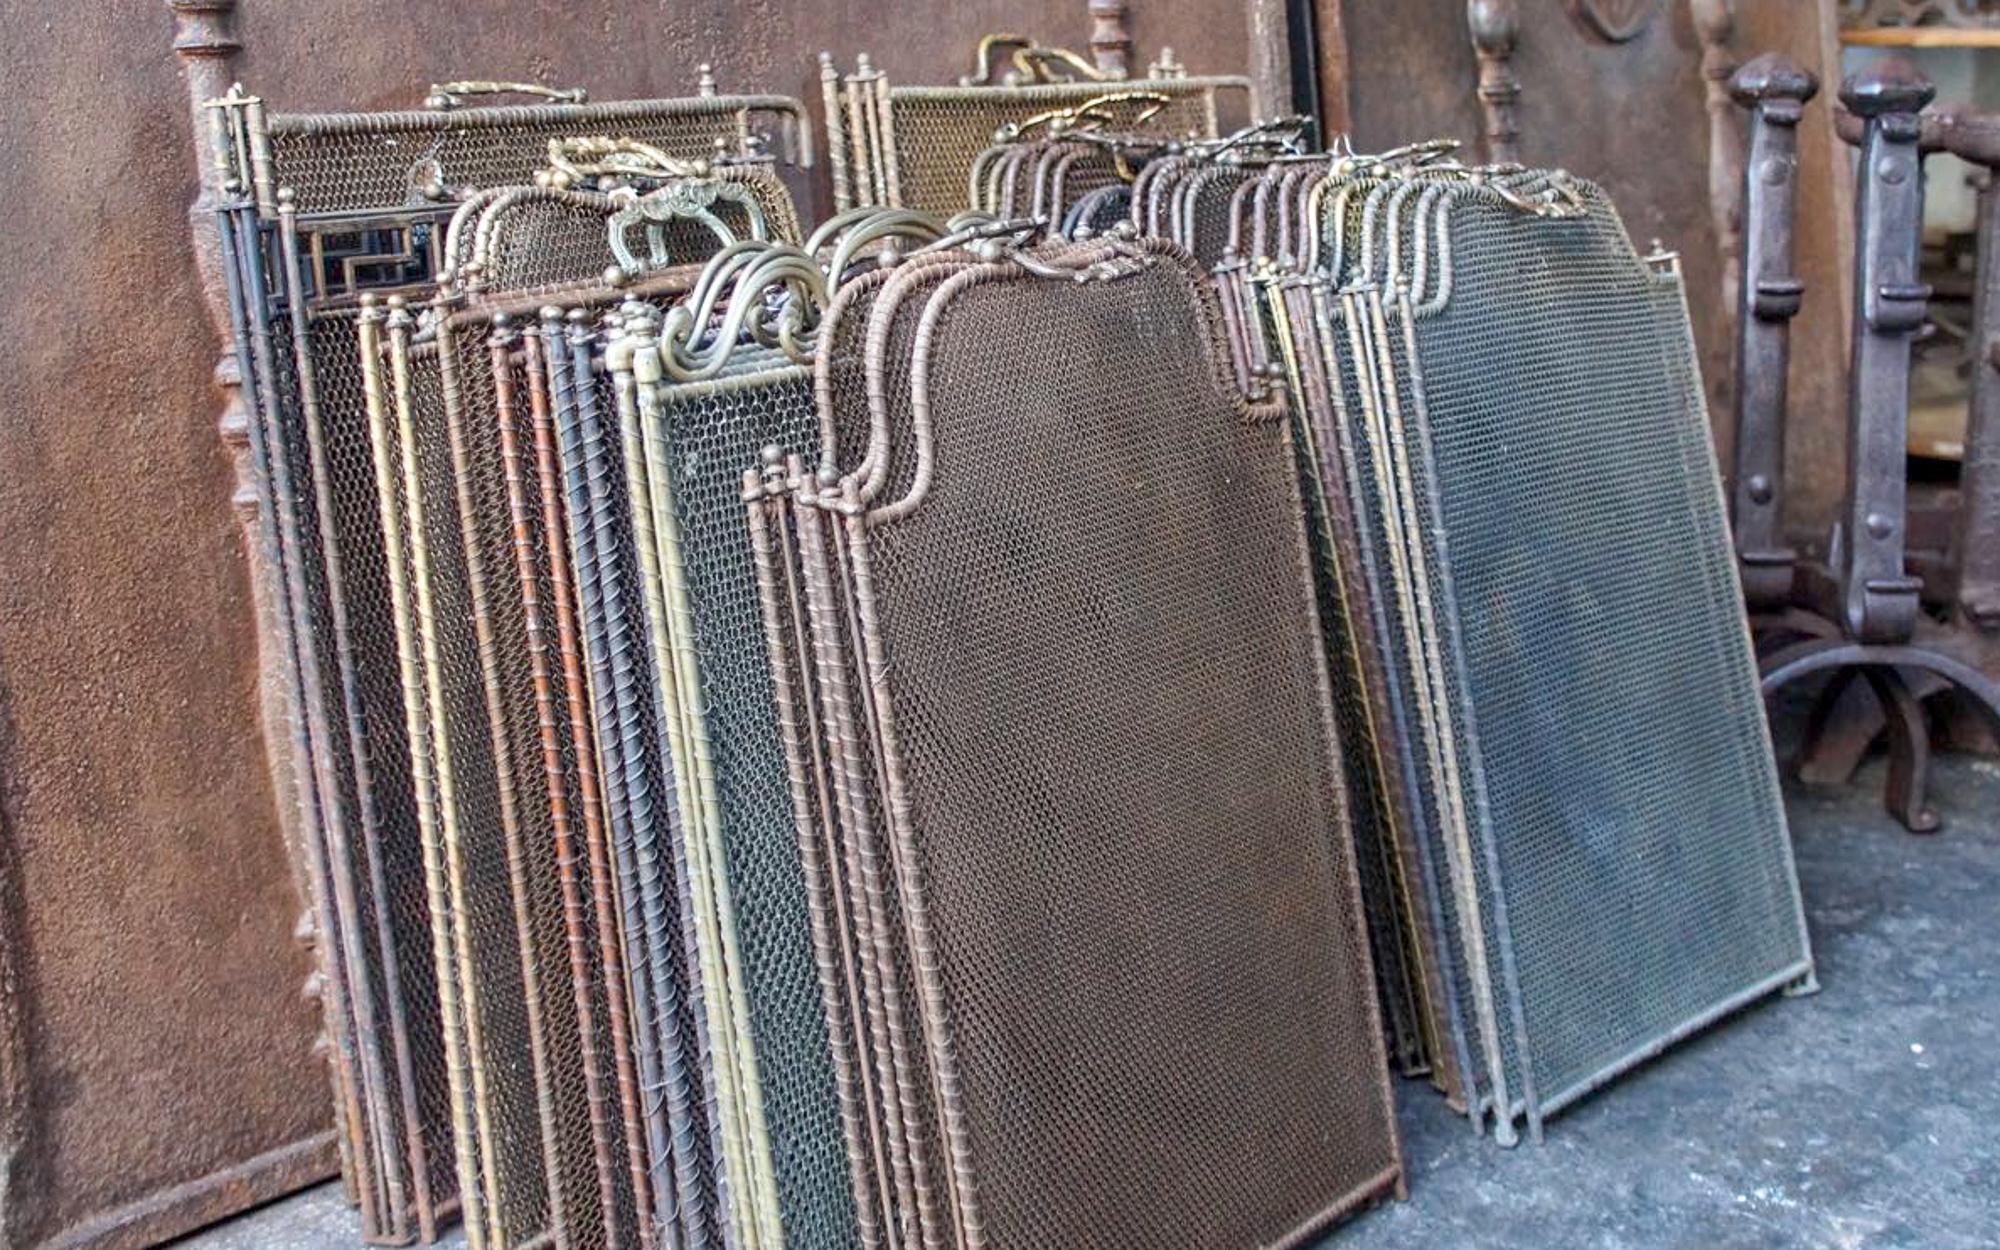 These fire screens can be bought separately. Prices vary somewhat. The indicated price is the average excluding shipping to North-America and Europe.

You can see all our current fireplace screens for sale at 1stdibs by pressing the ‘View All From